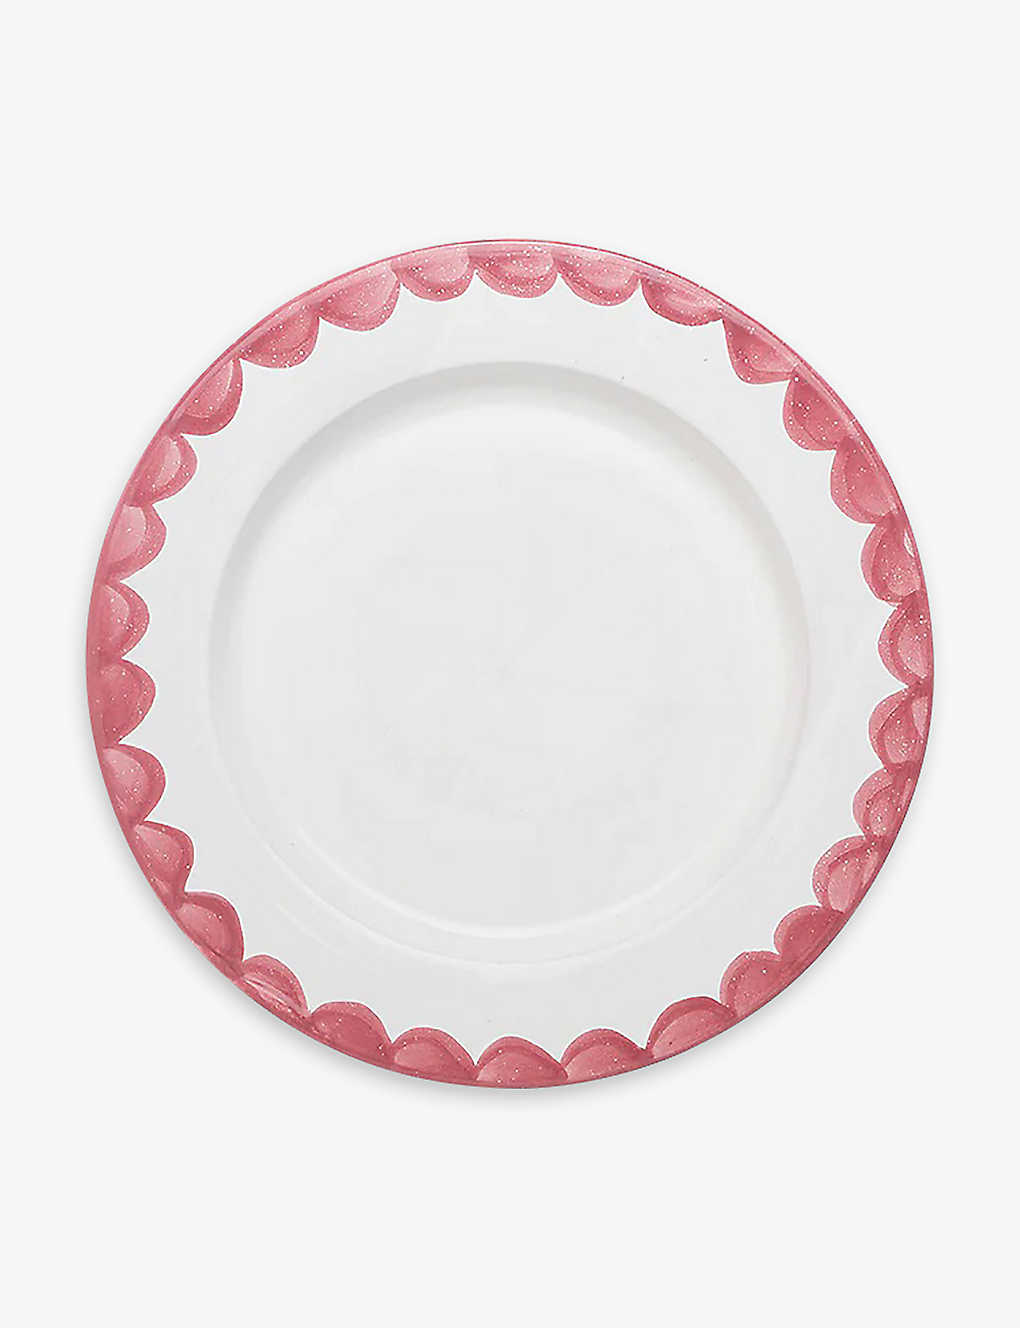 Glassette Pink Cream Late Afternoon Scalloped-pattern Ceramic Dinner Plates Set Of Four